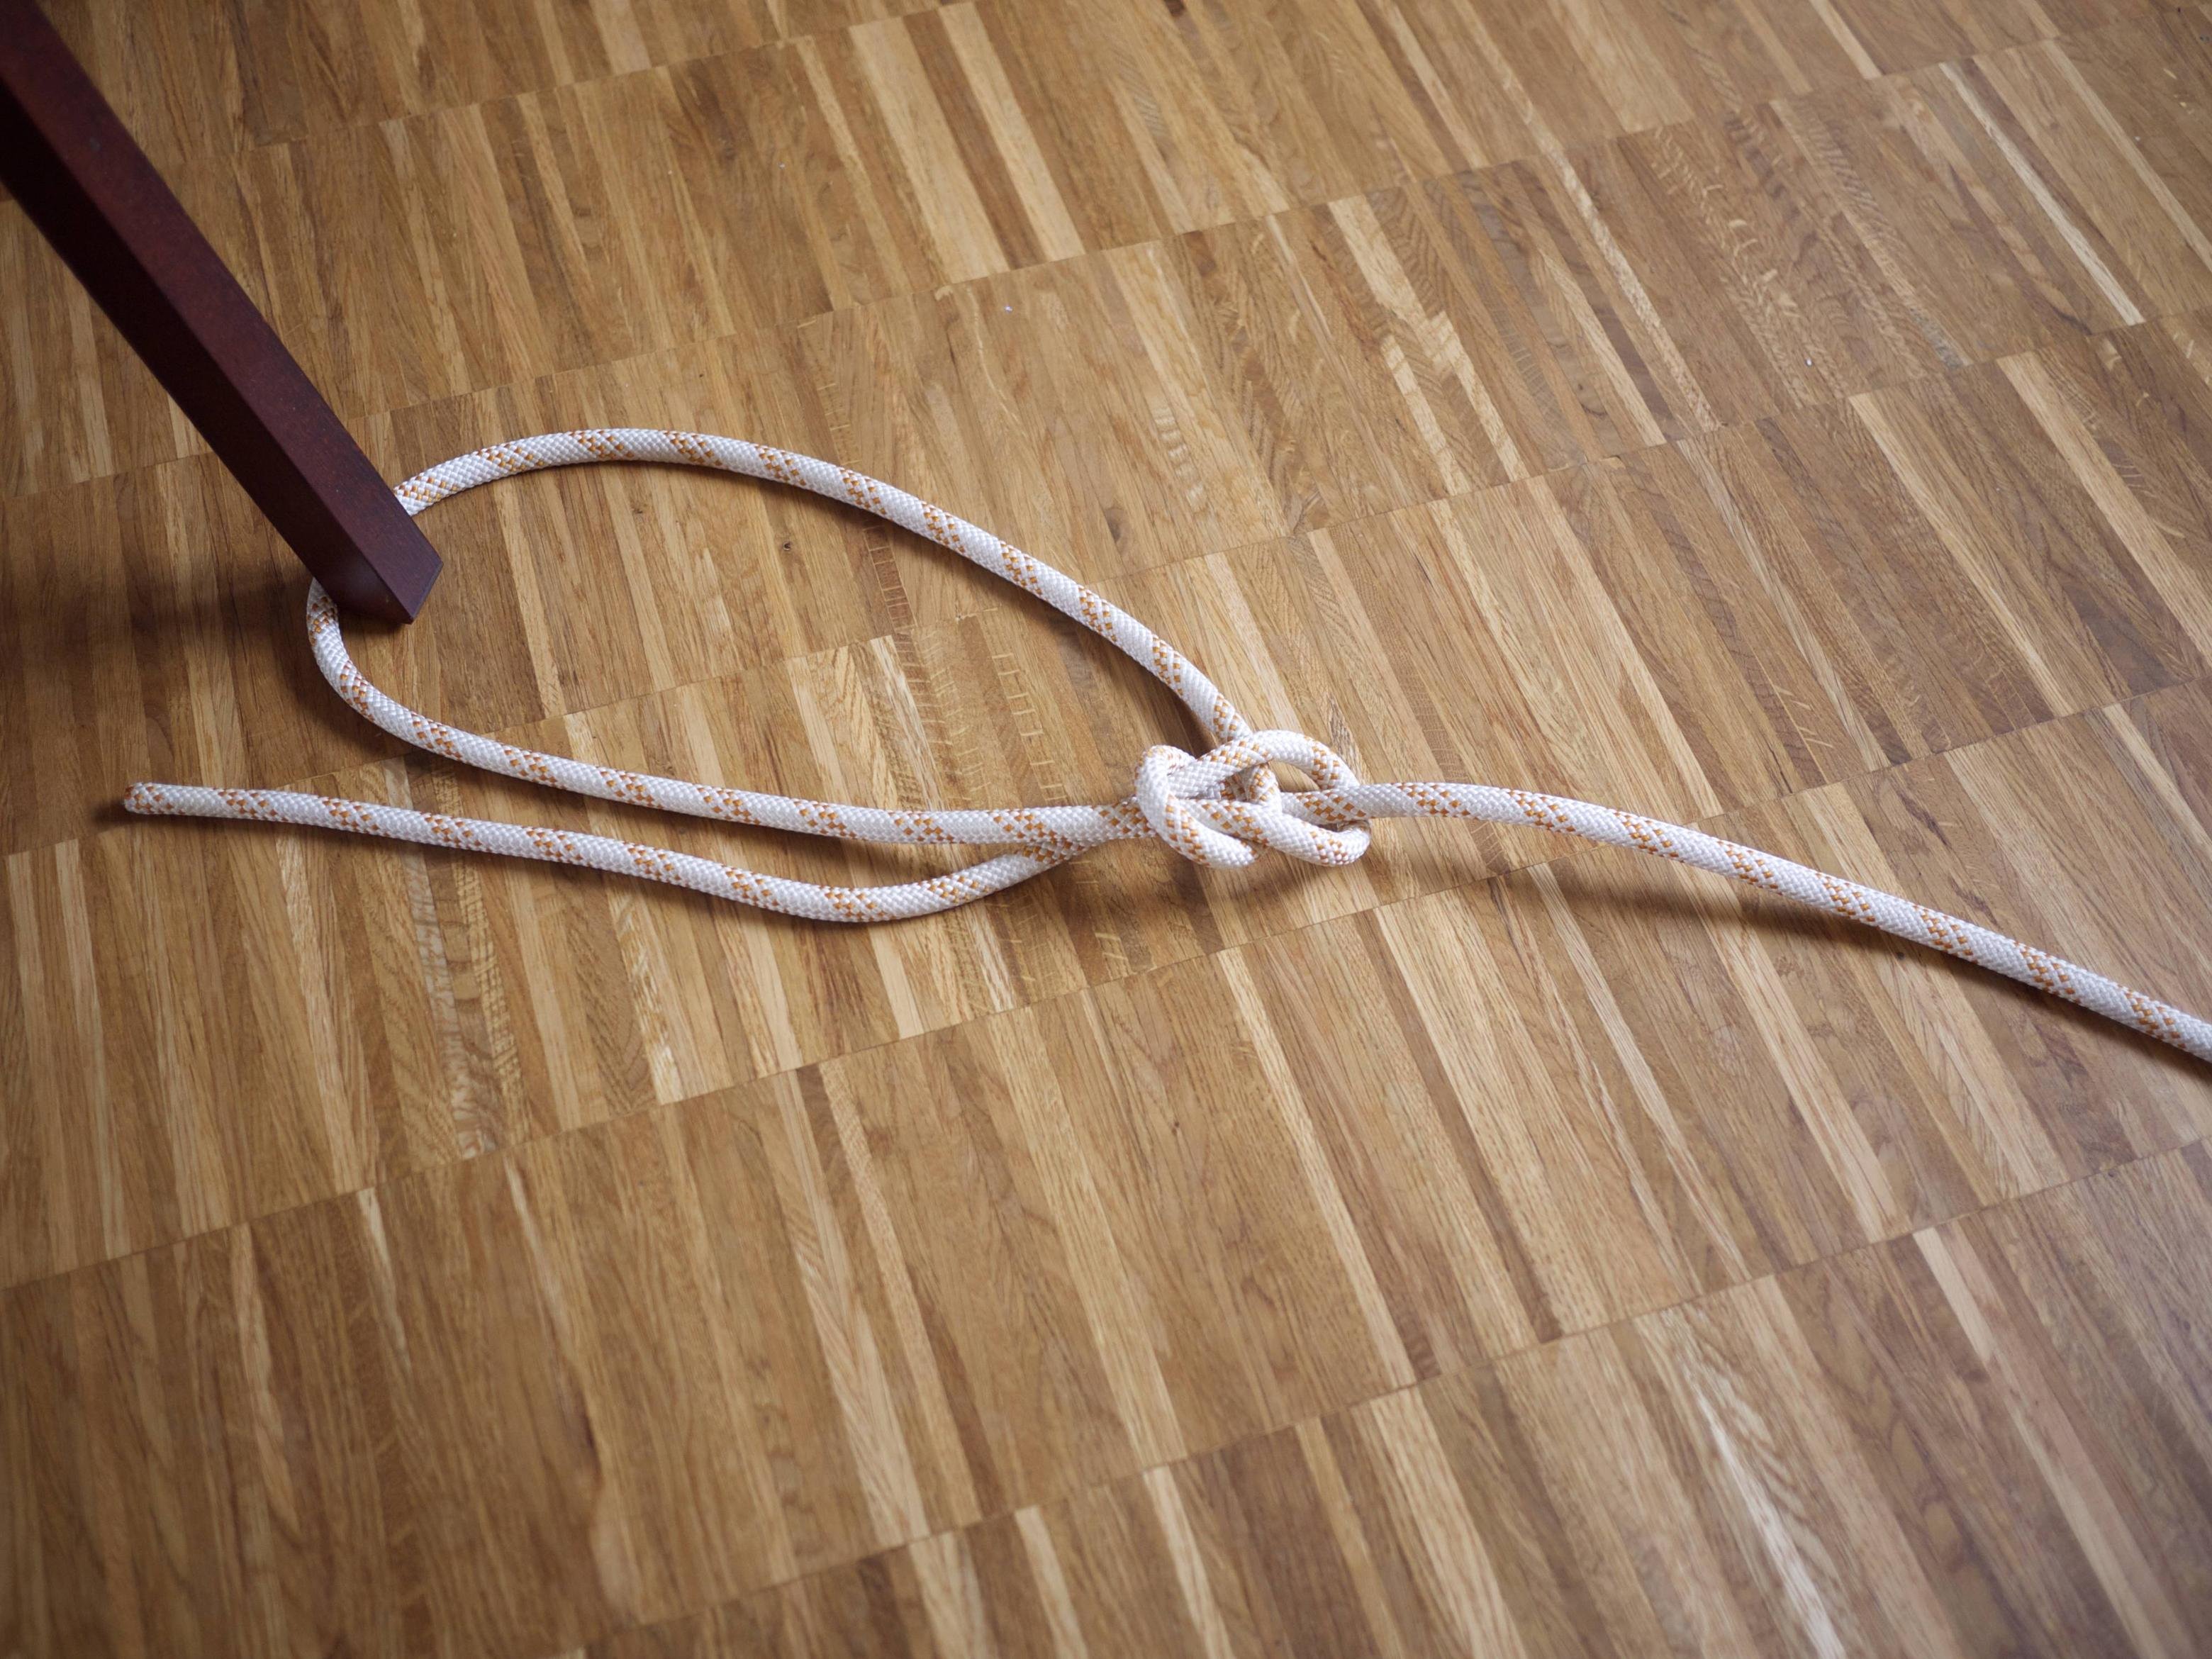 The safe way to use a bowline knot